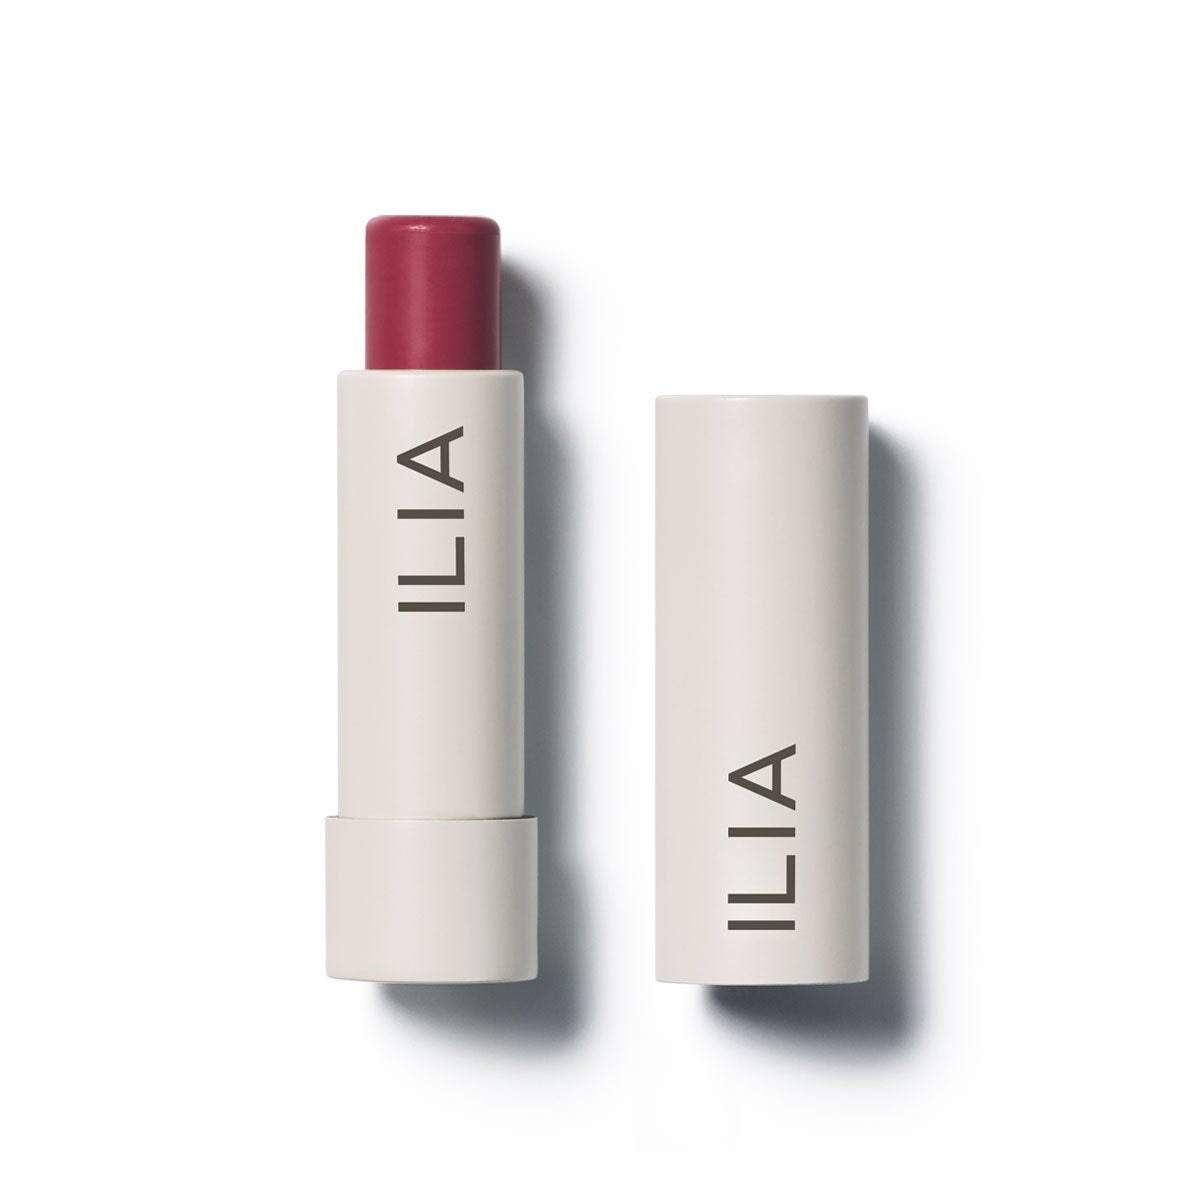 Primary Image of Lullaby Balmy Tint